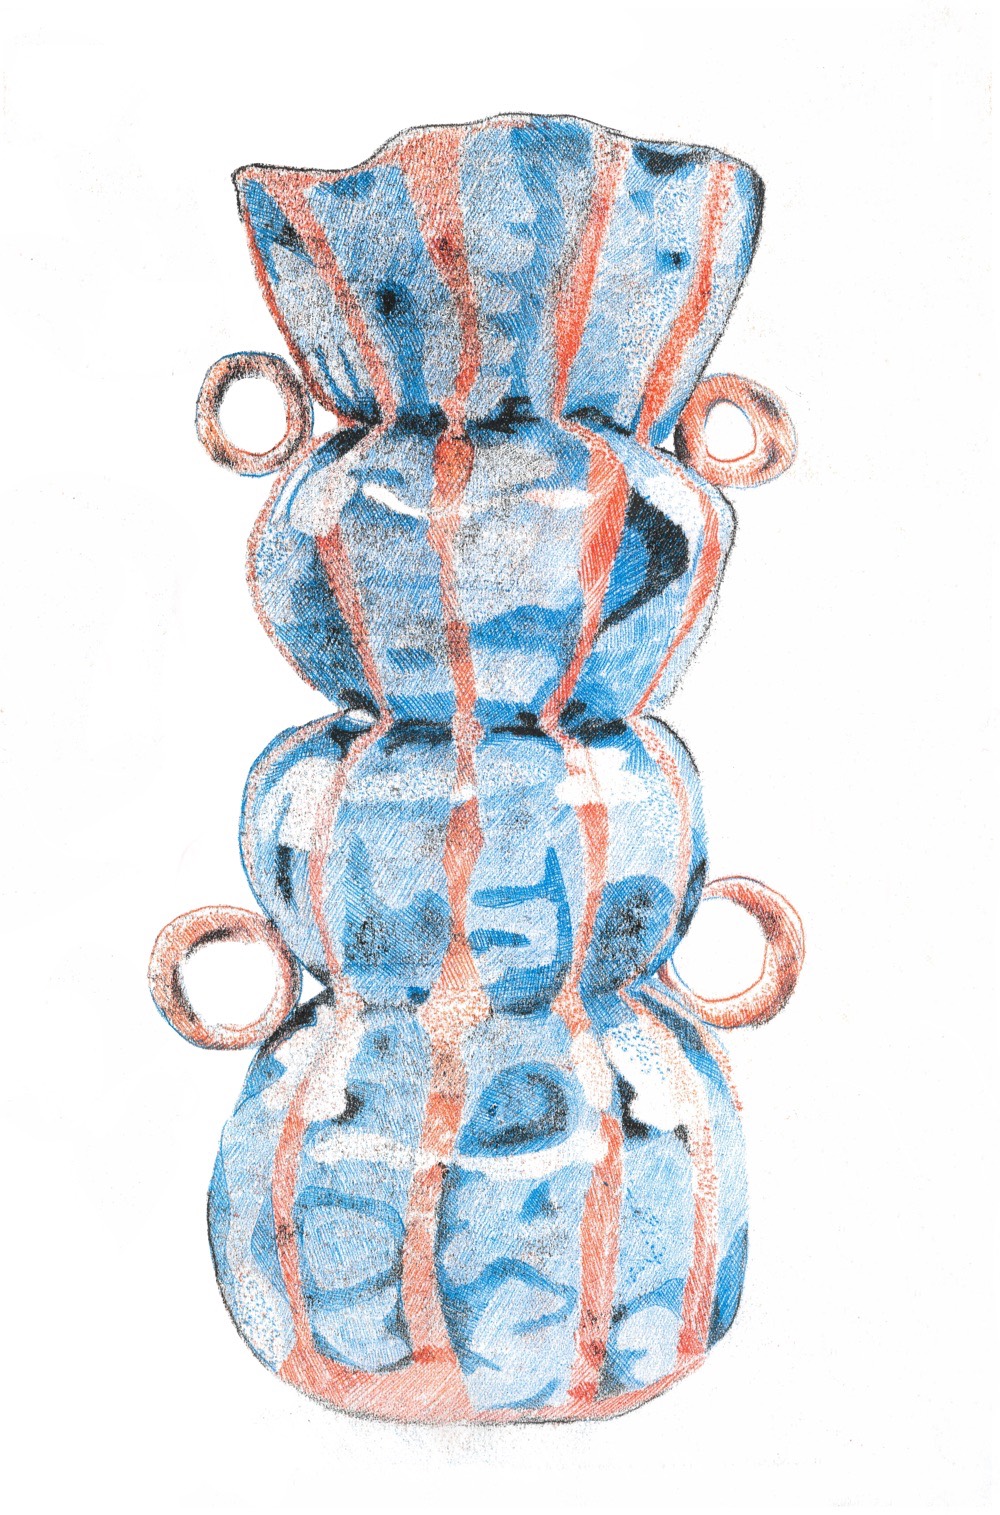 Monotype print of vase in blue and red